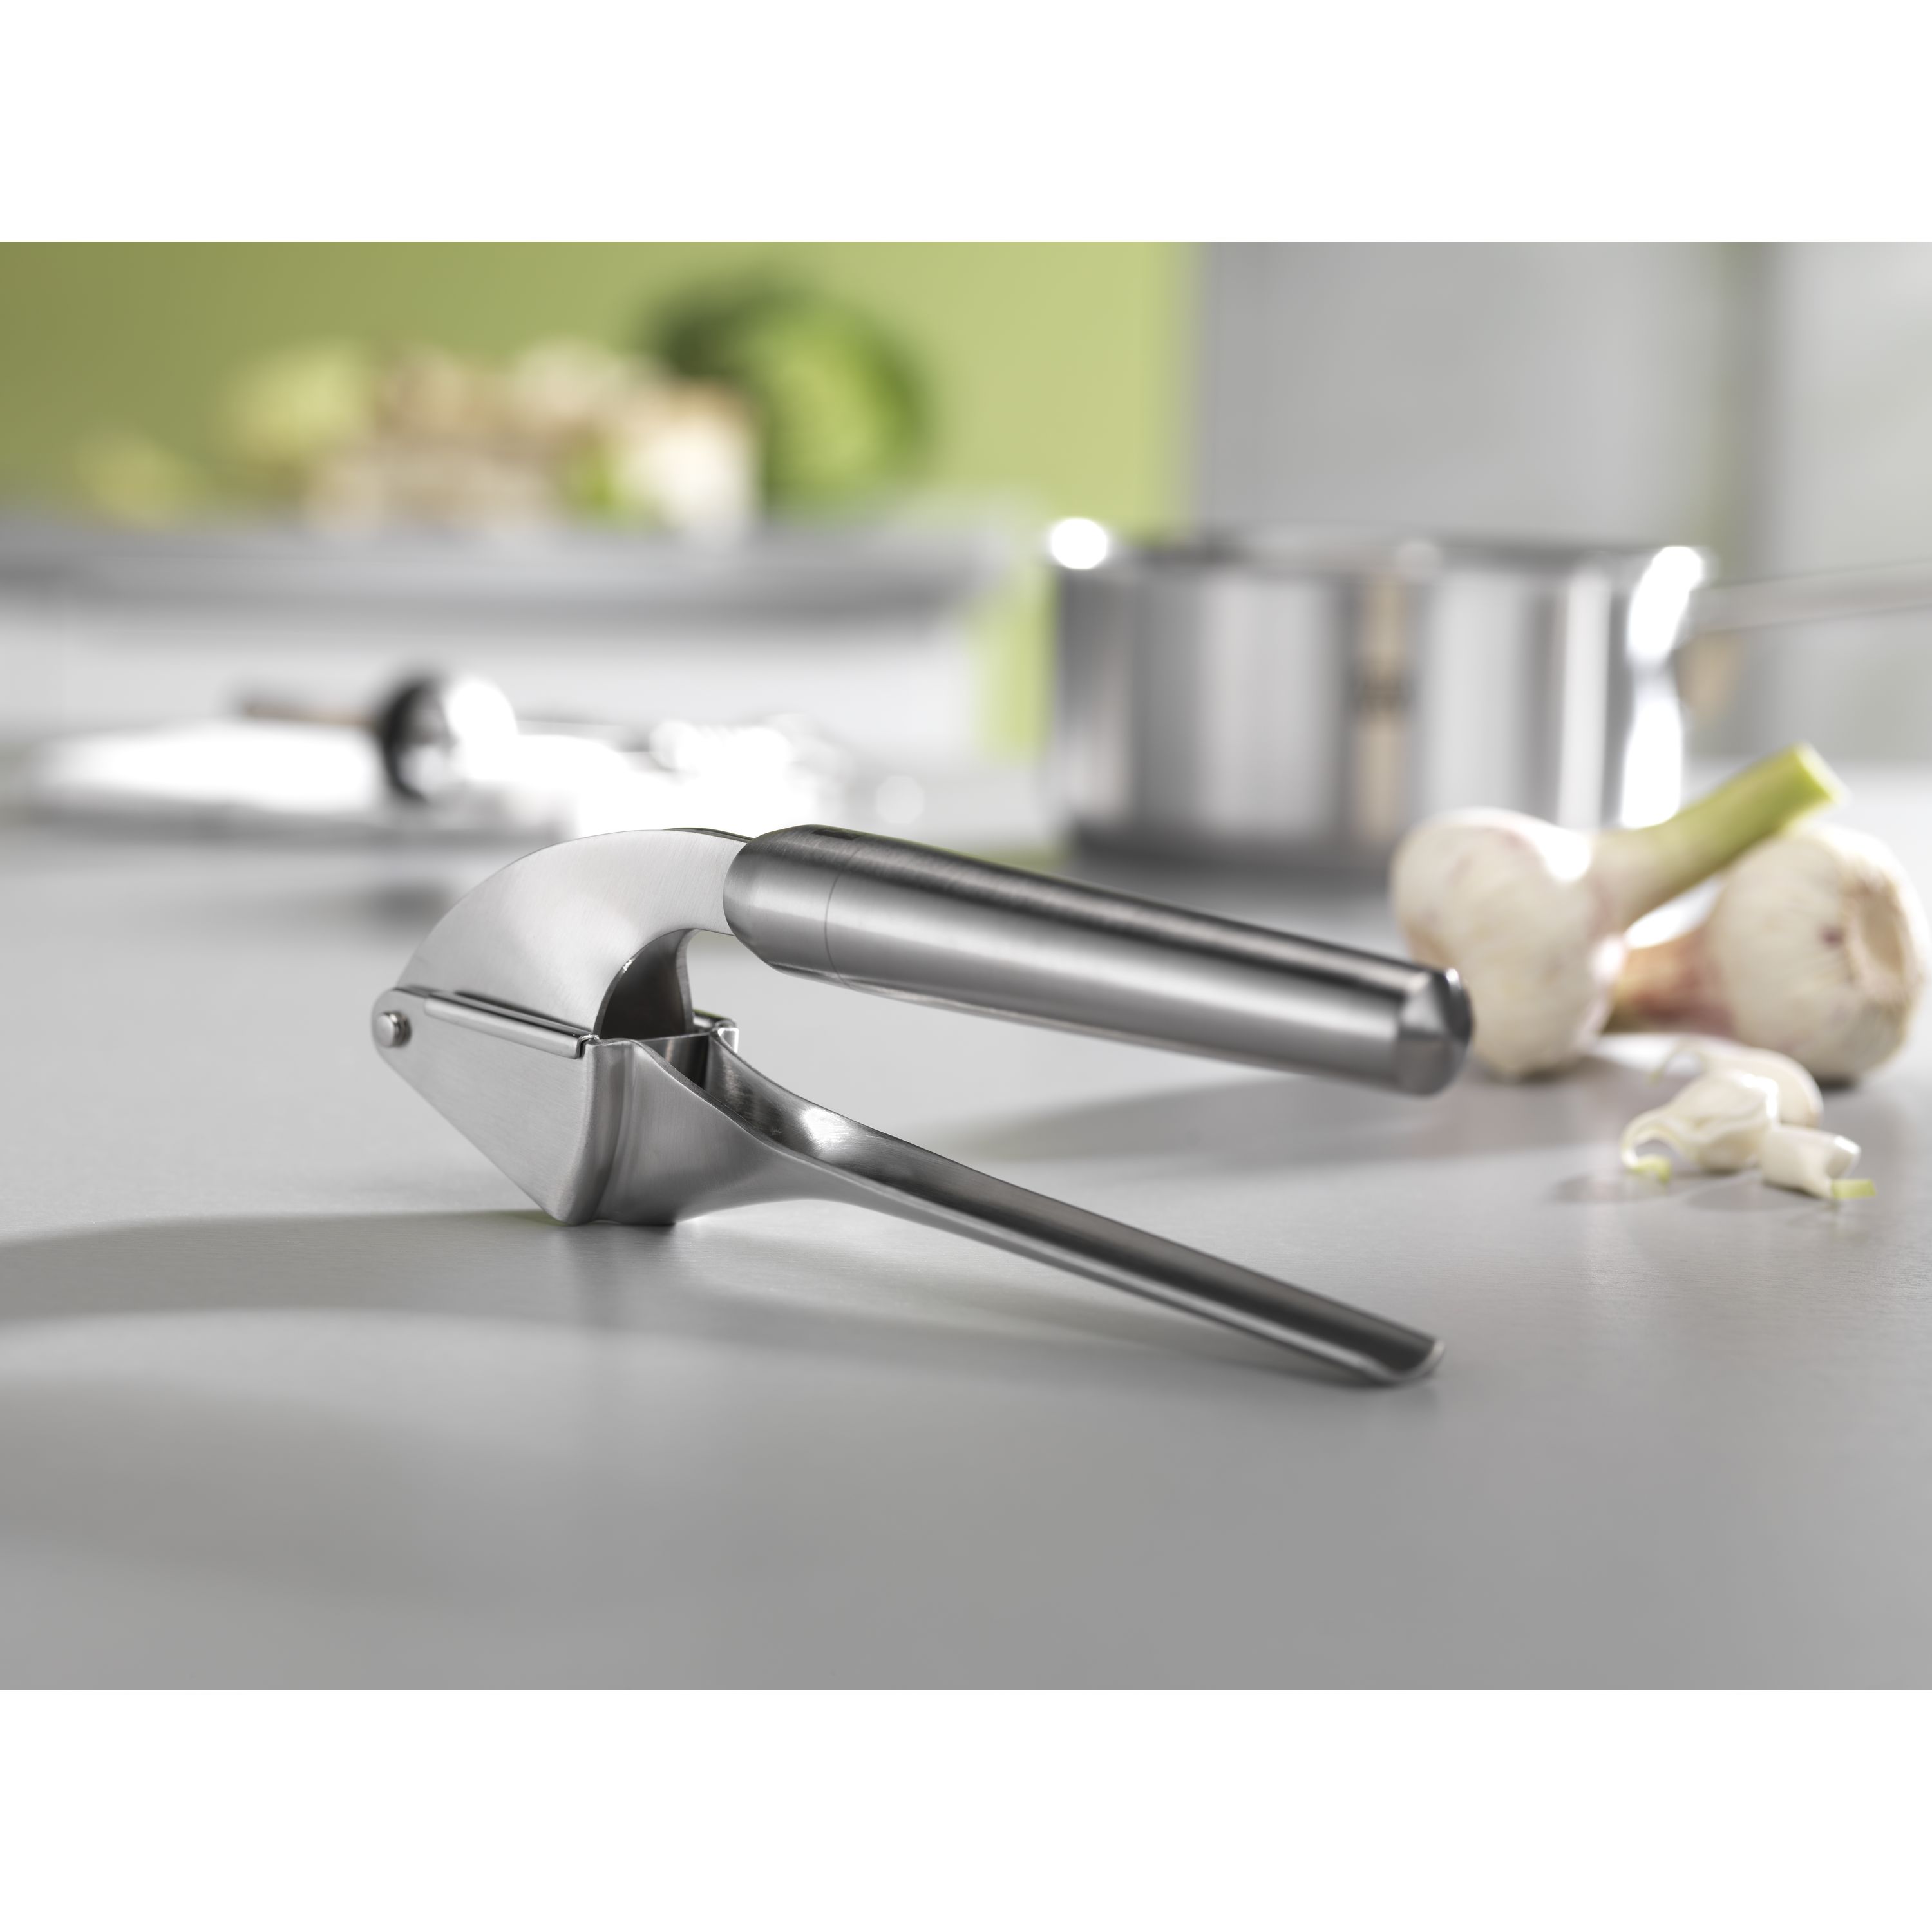 Buy First Front Stainless Steel Garlic Press Crusher Grinding